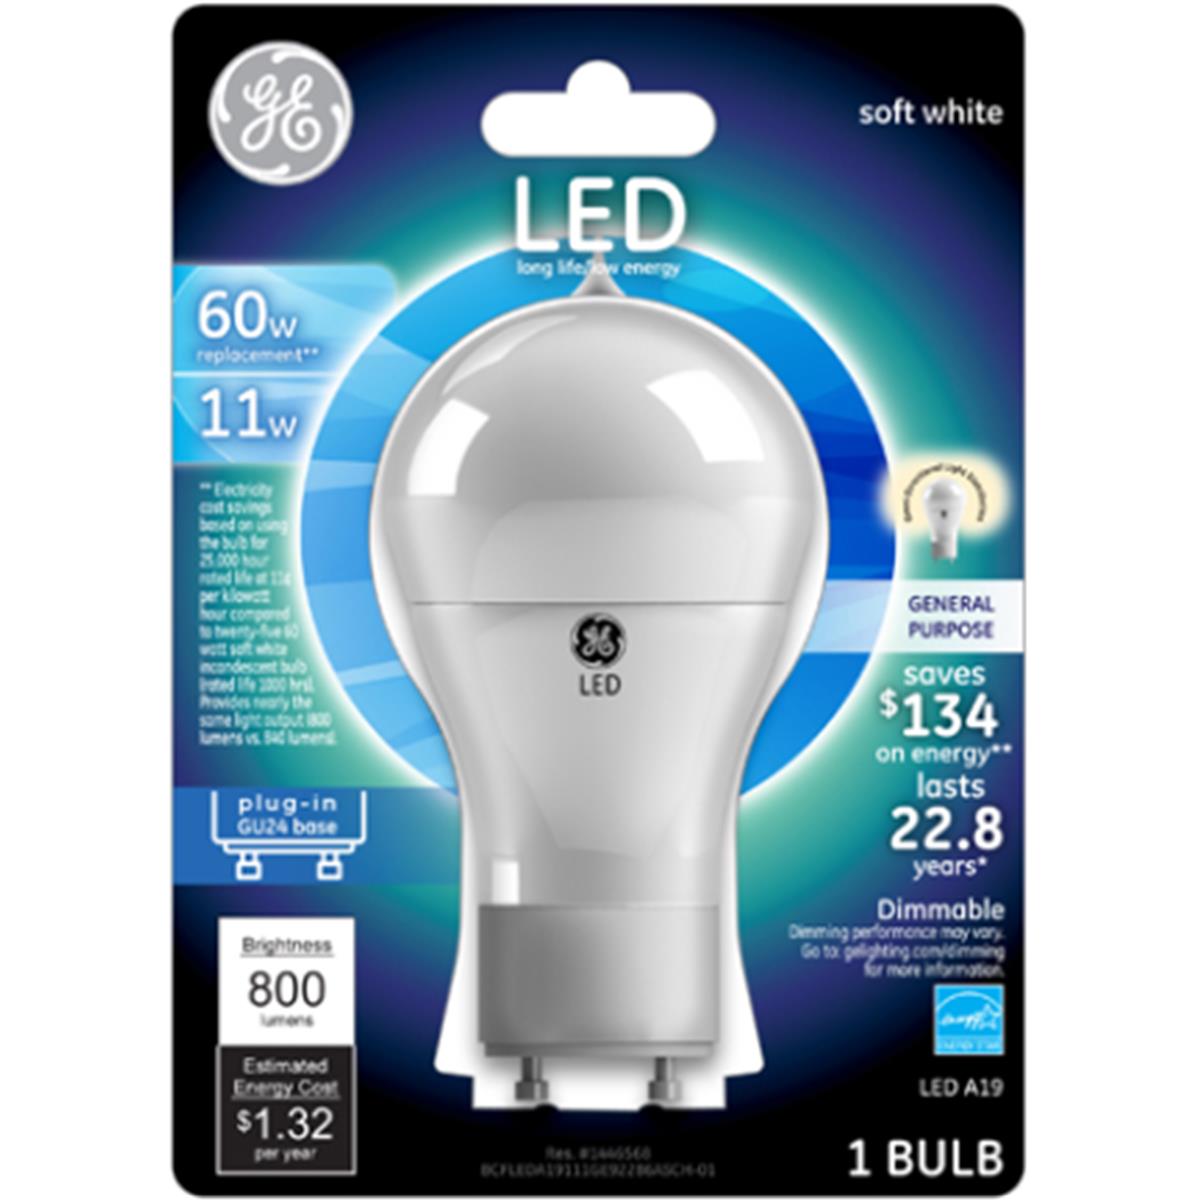 General Electric 44775 10w A19 Led Light Bulb 60w Equivalent, Soft White - Pack Of 24